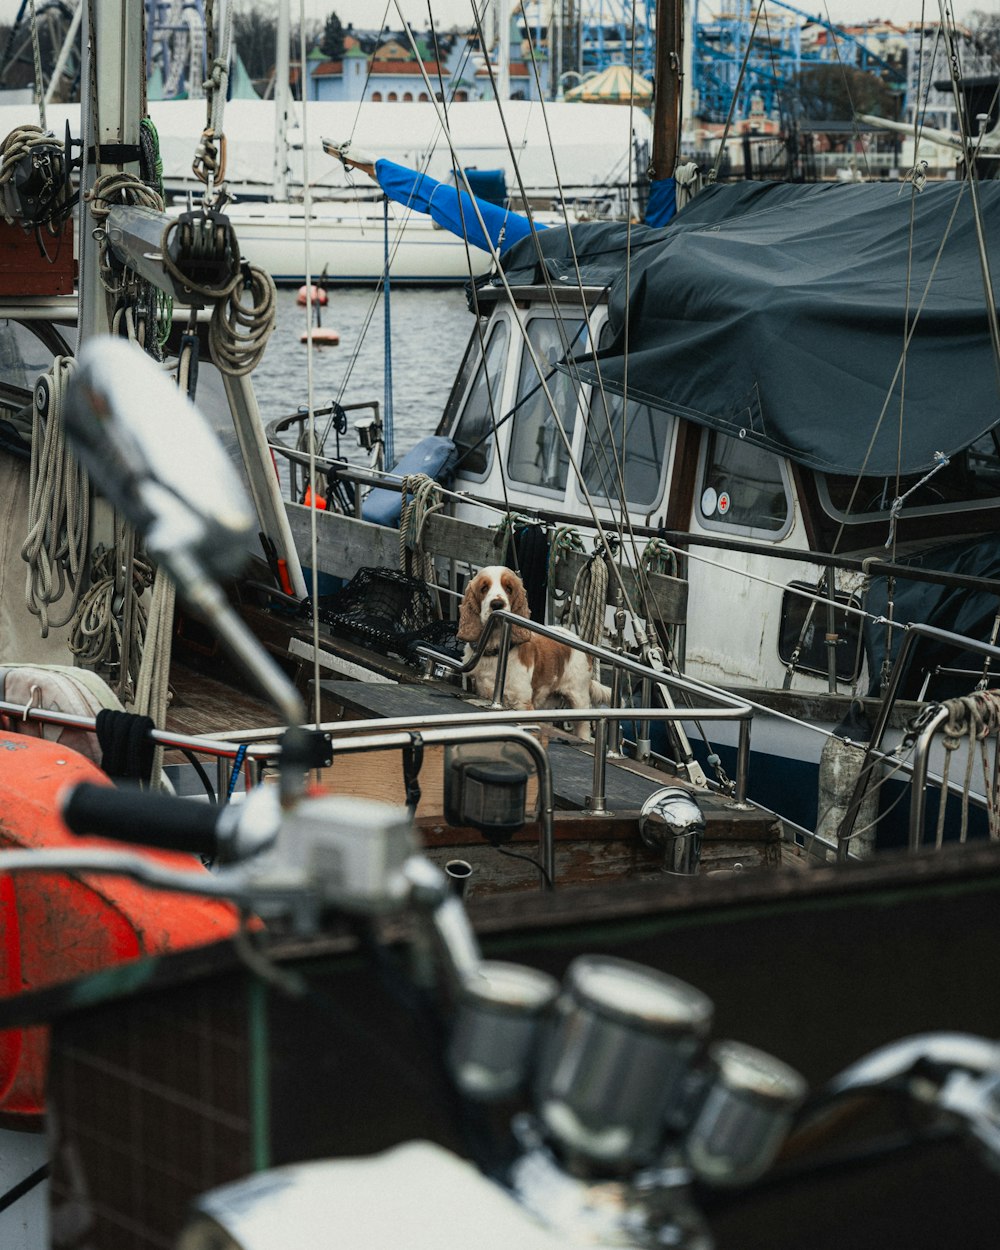 a dog is sitting on the deck of a boat